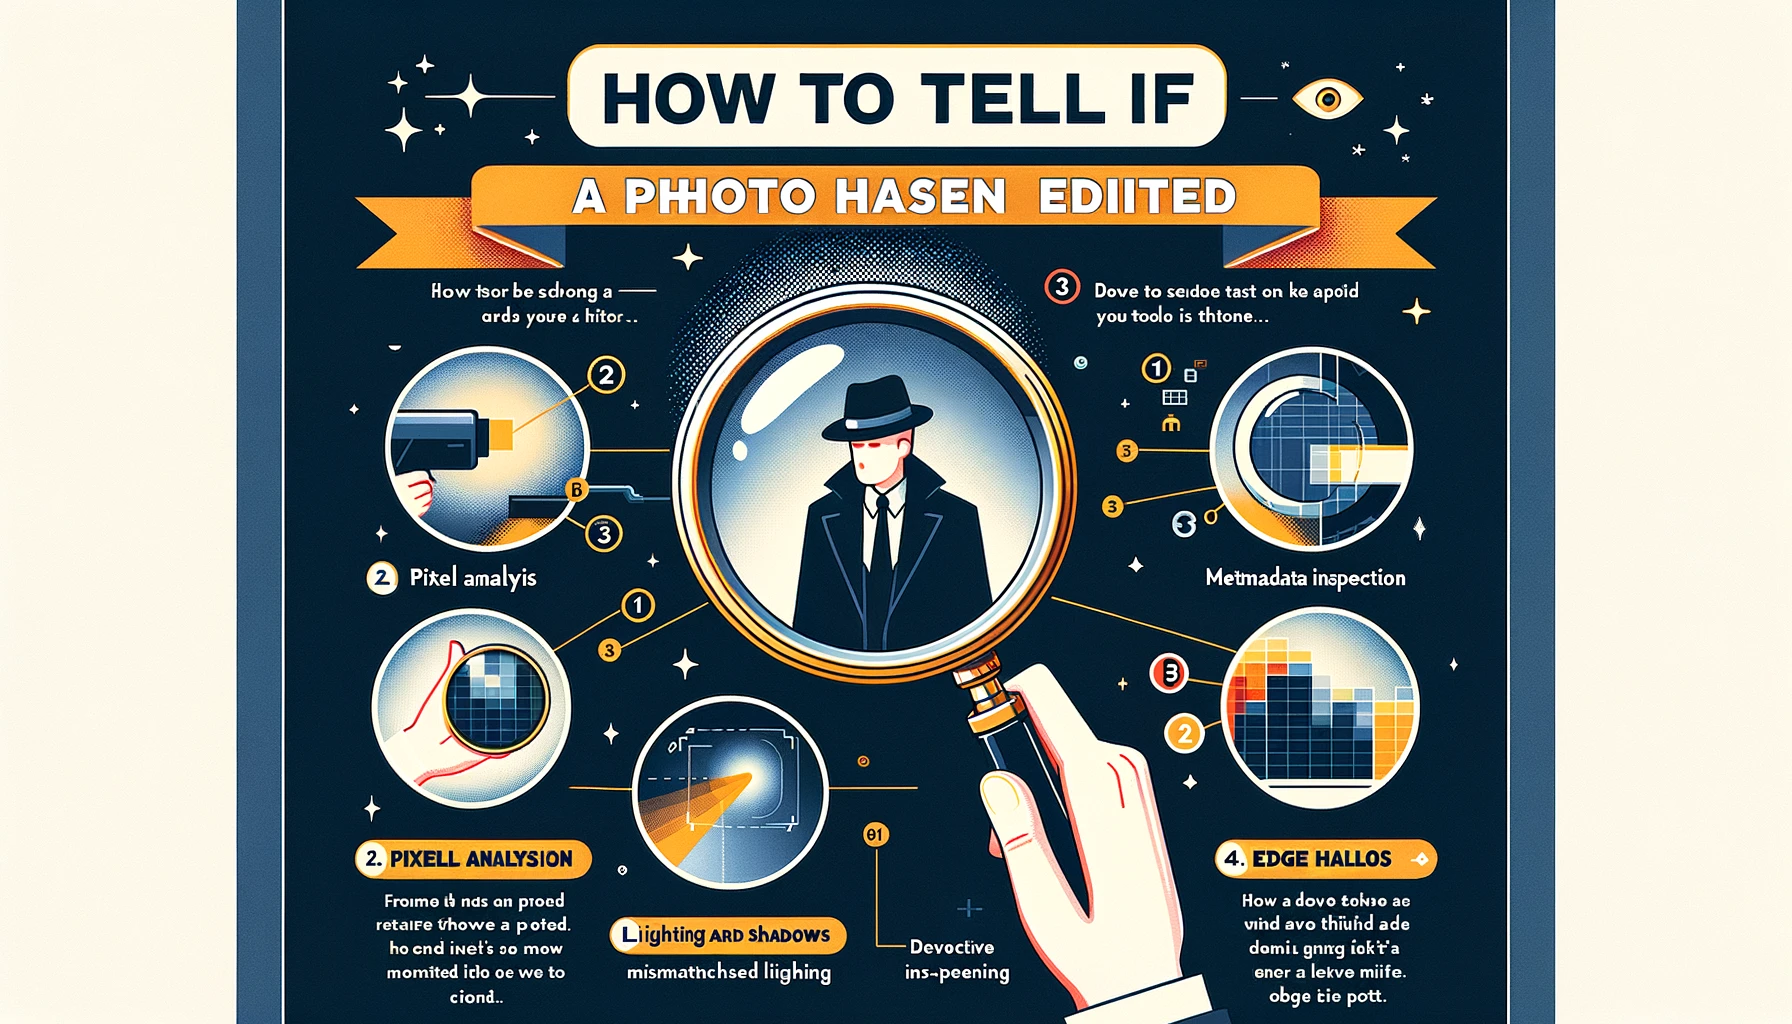 How To Tell If A Photo Has Been Edited